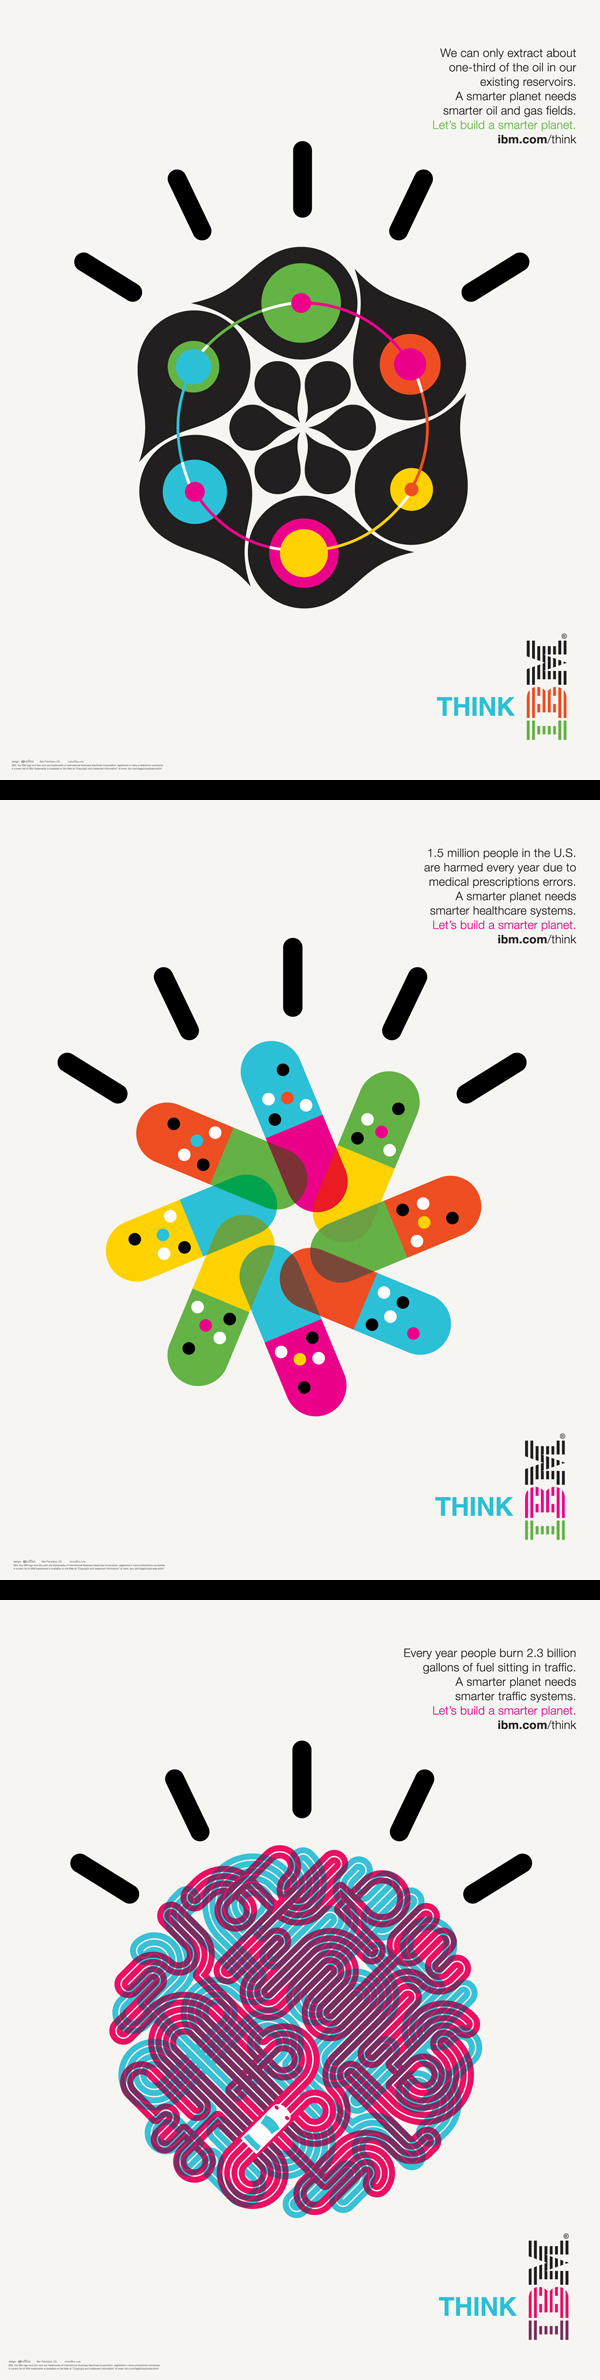 inspirations graphiques #13 Office | IBM Smarter Planet